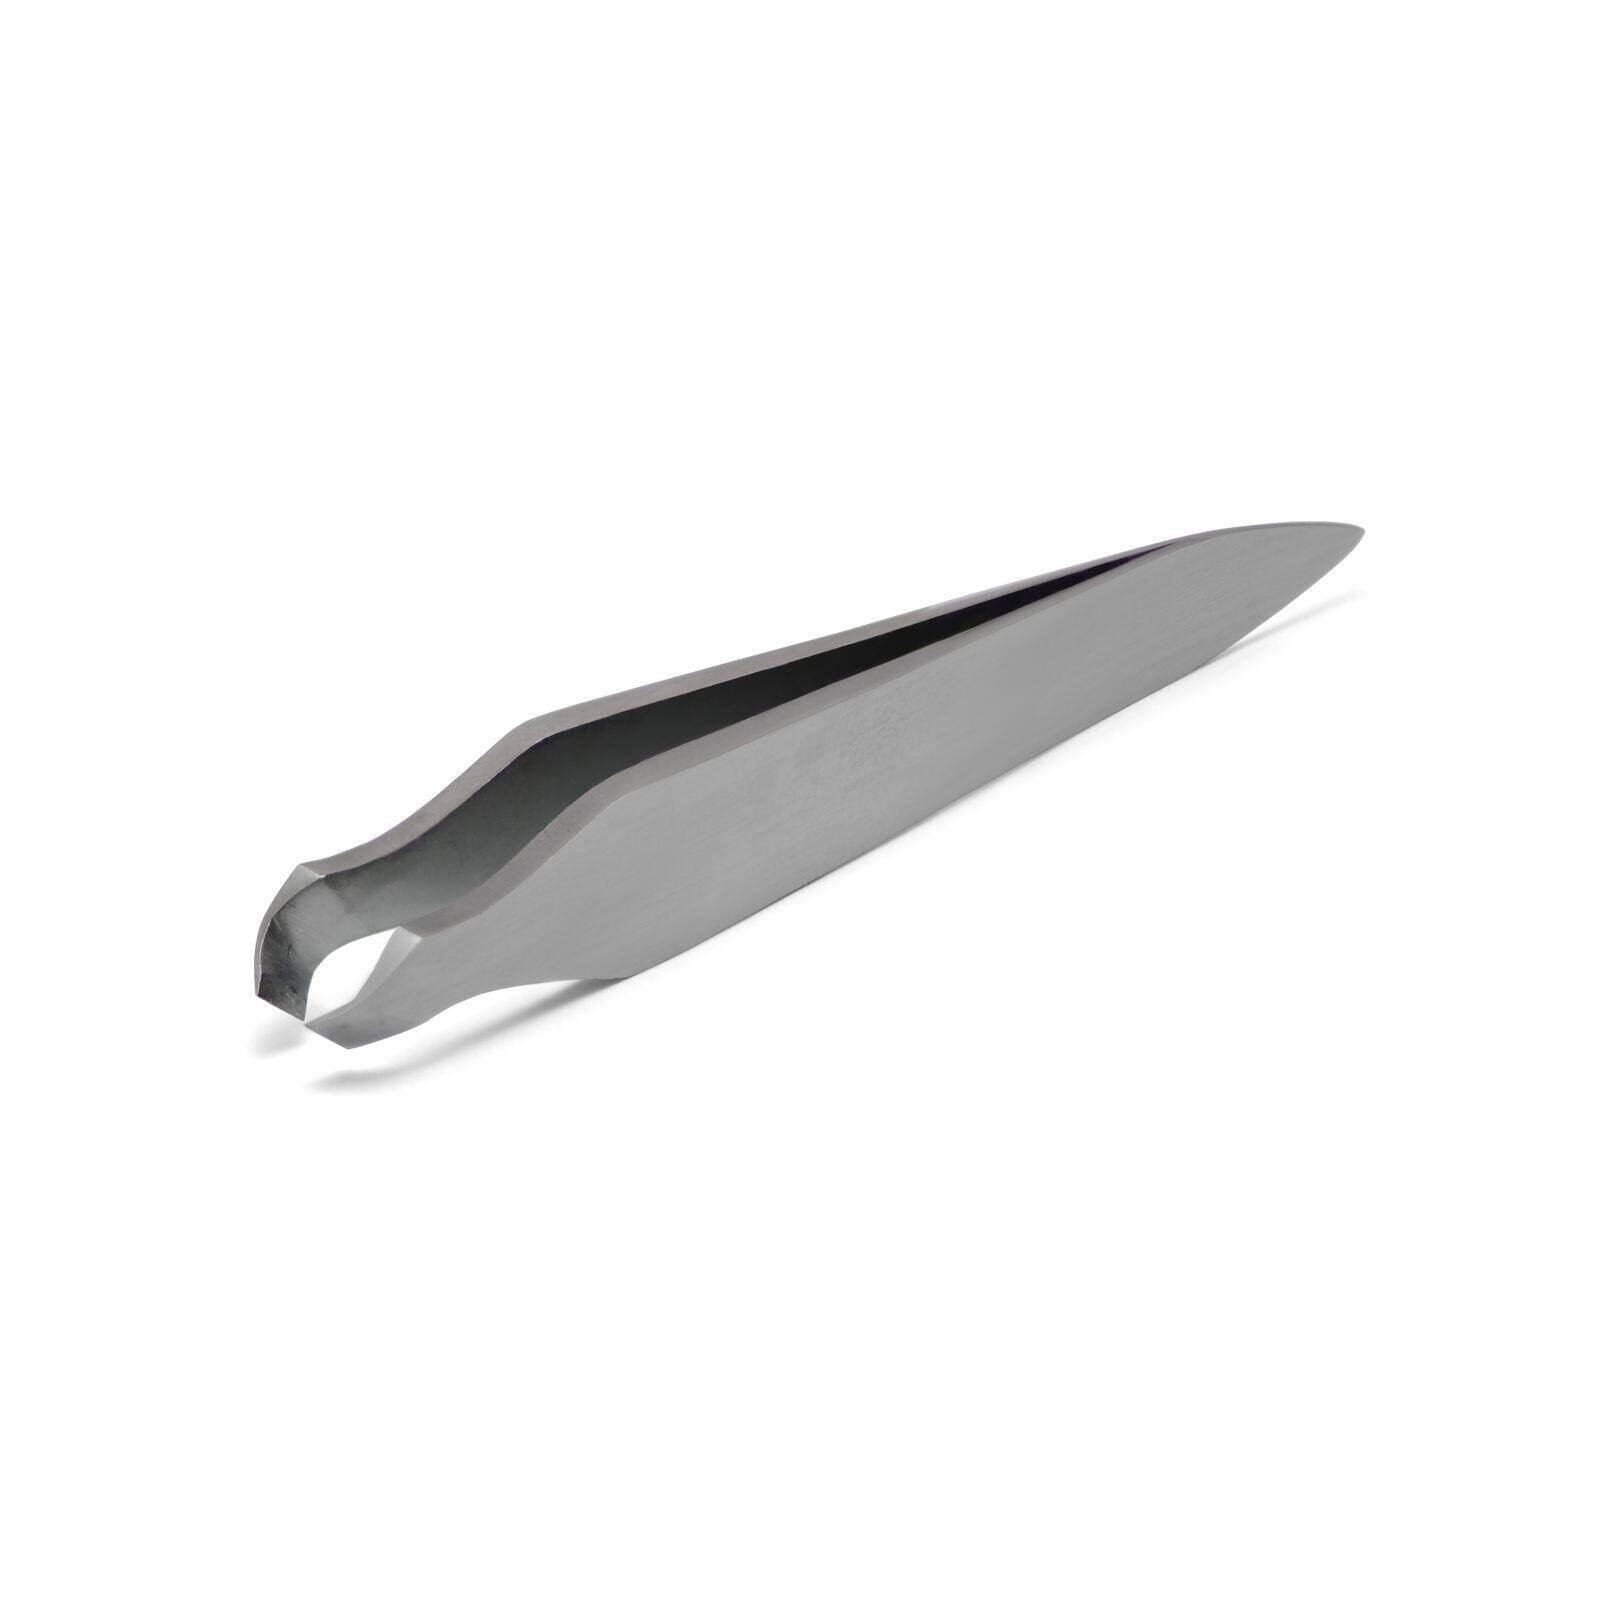 Cuticle Nippers in a Tweezers Shape, Stainless Steel, Made in Solingen  (Germany) 1525 - Mont bleu Store